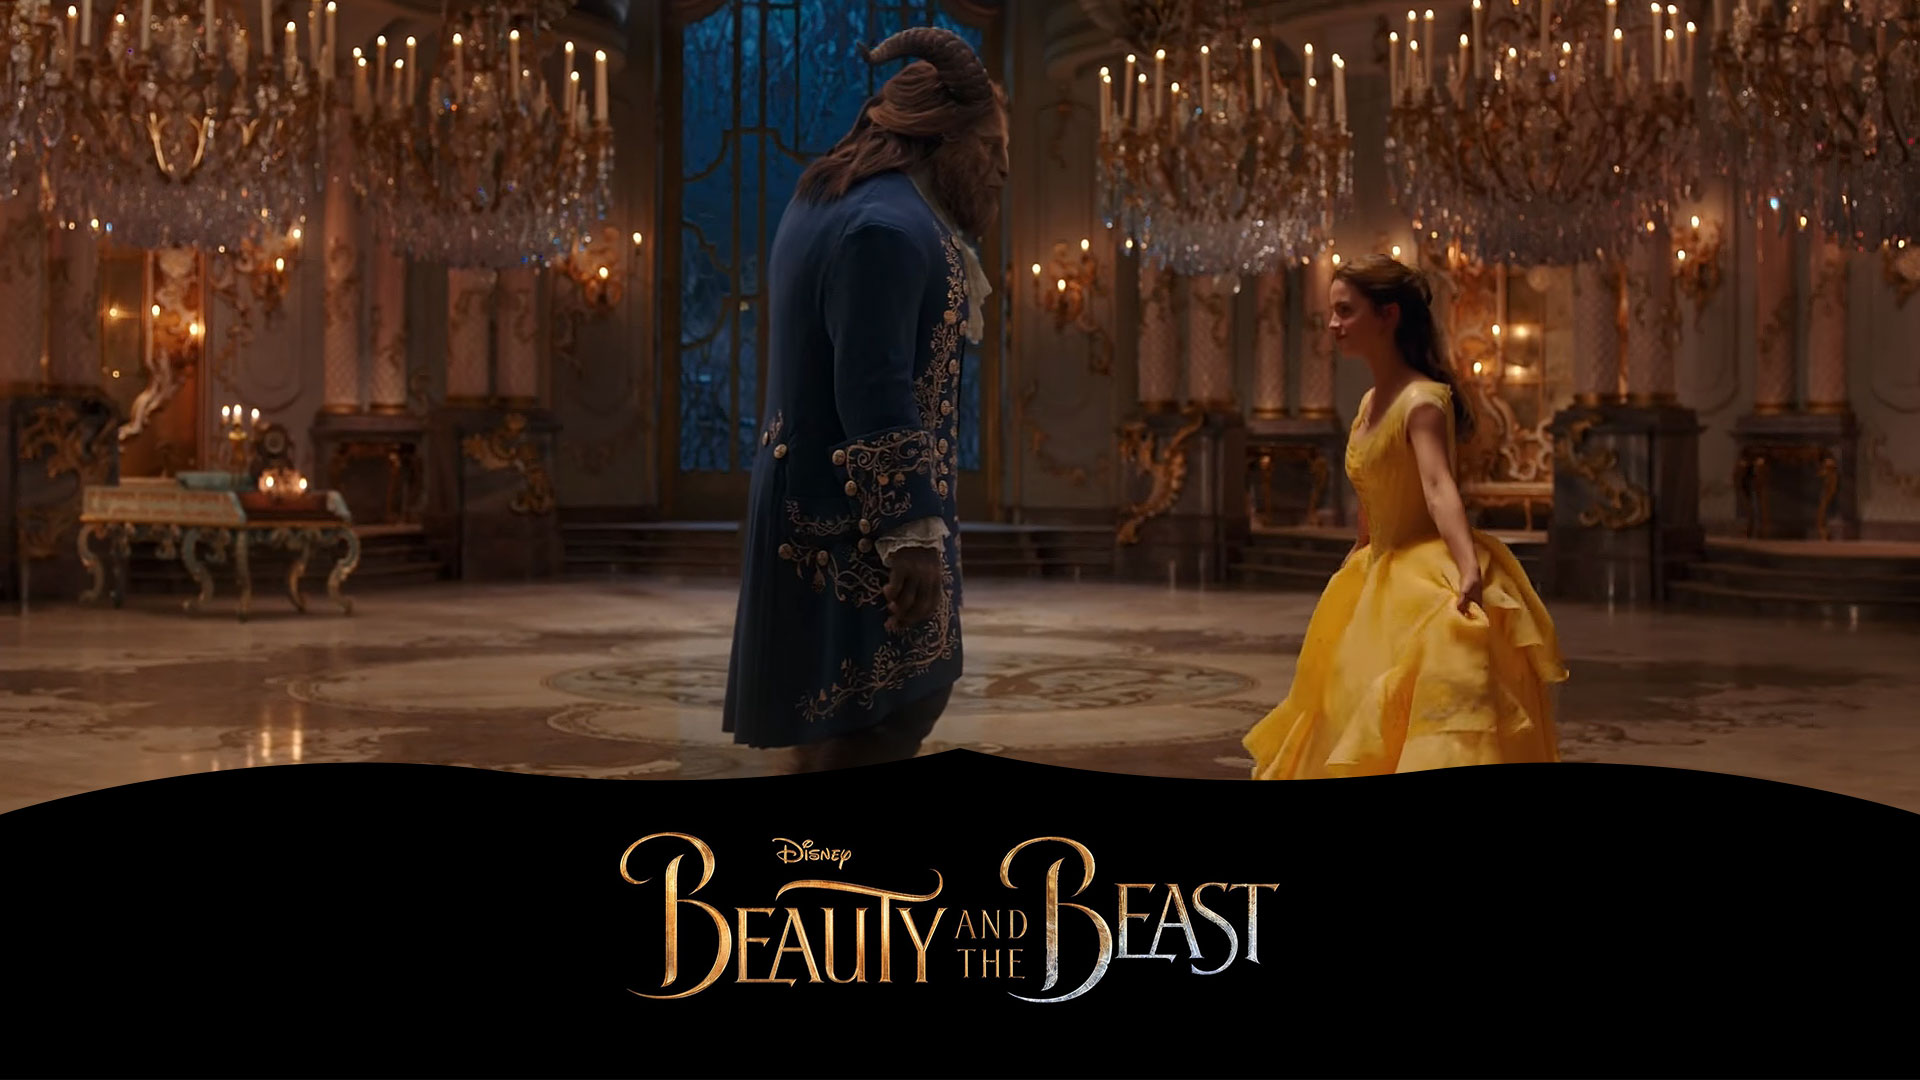 beauty and the beast wallpaper,darkness,photography,scene,midnight,movie